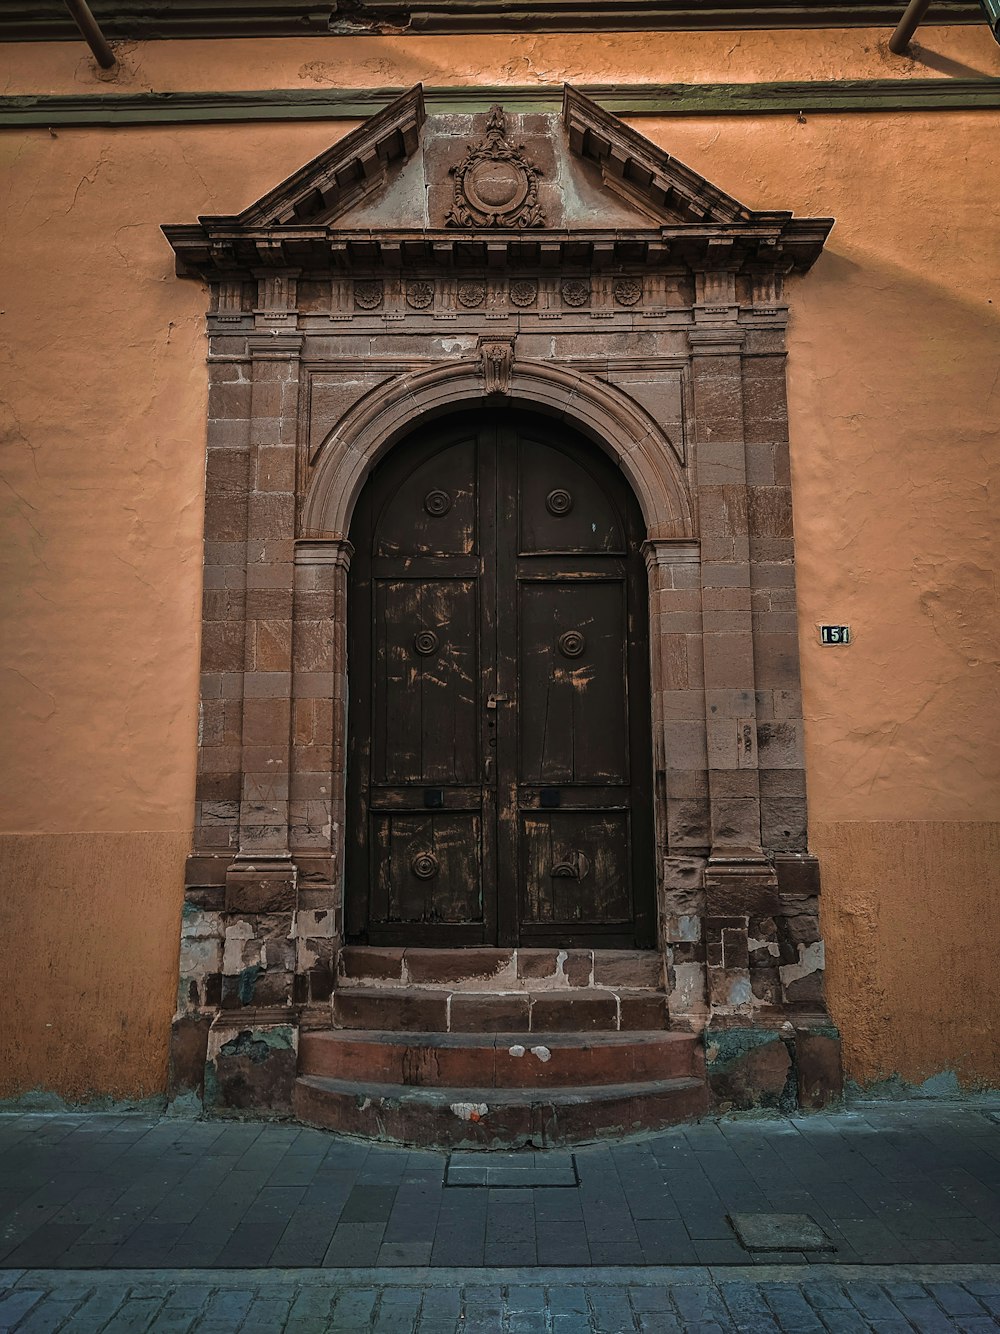 a doorway with a clock on the side of a building